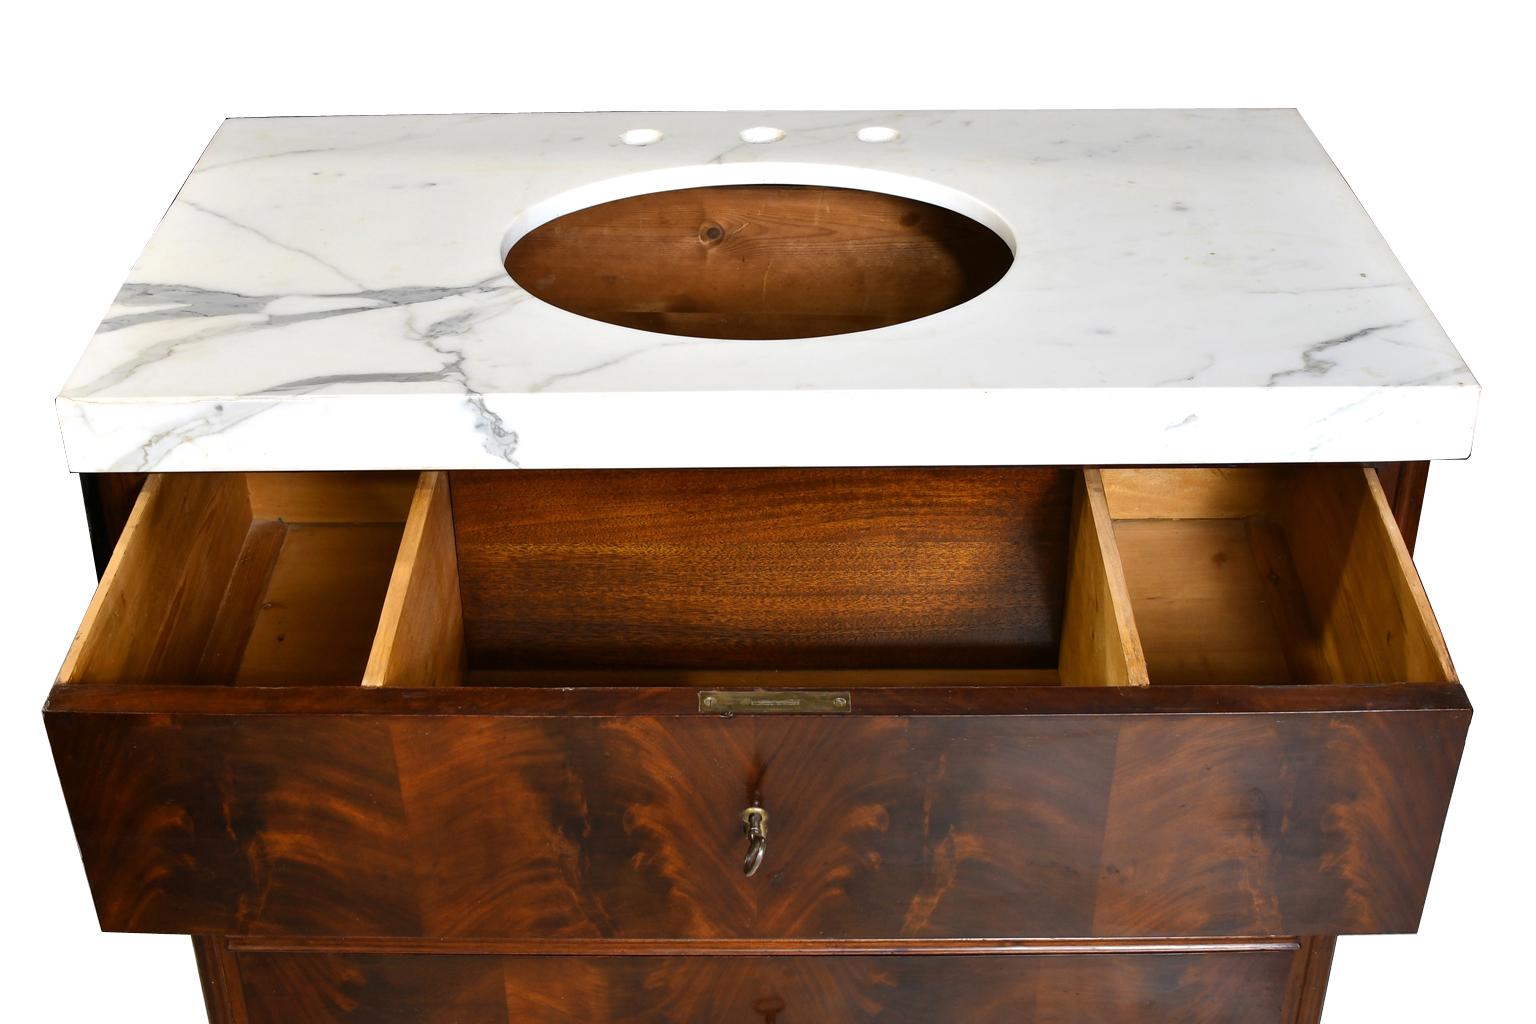 Polished Antique Swedish Mahogany Chest Adapted as Vanity with Calacatta Gold Marble Top